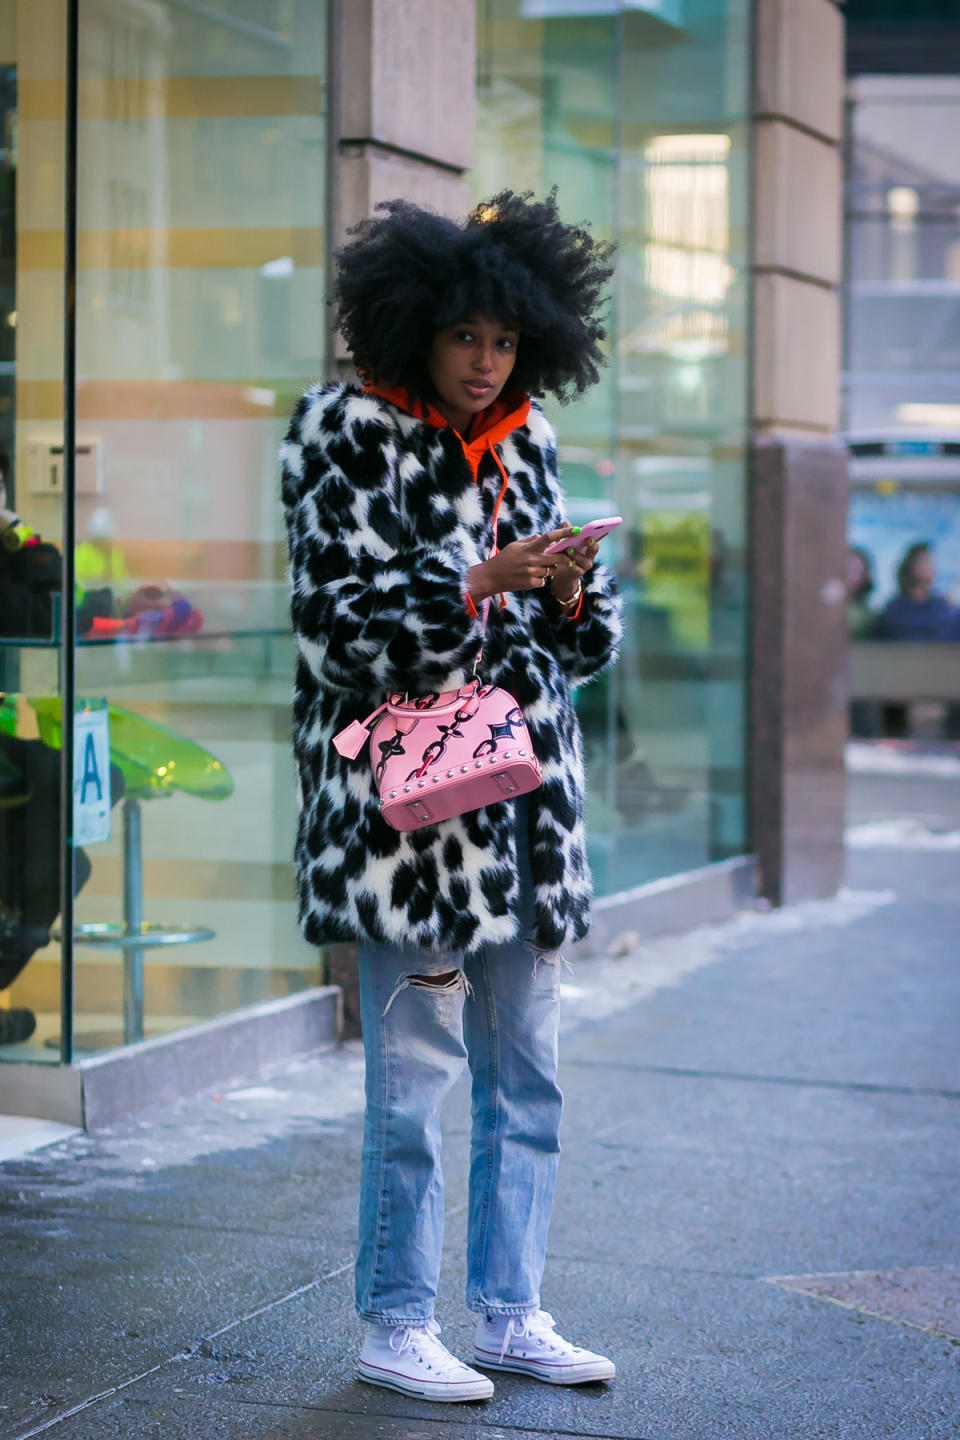 Julia Sarr-Jamois shows off her eclectic style at New York Fashion Week.